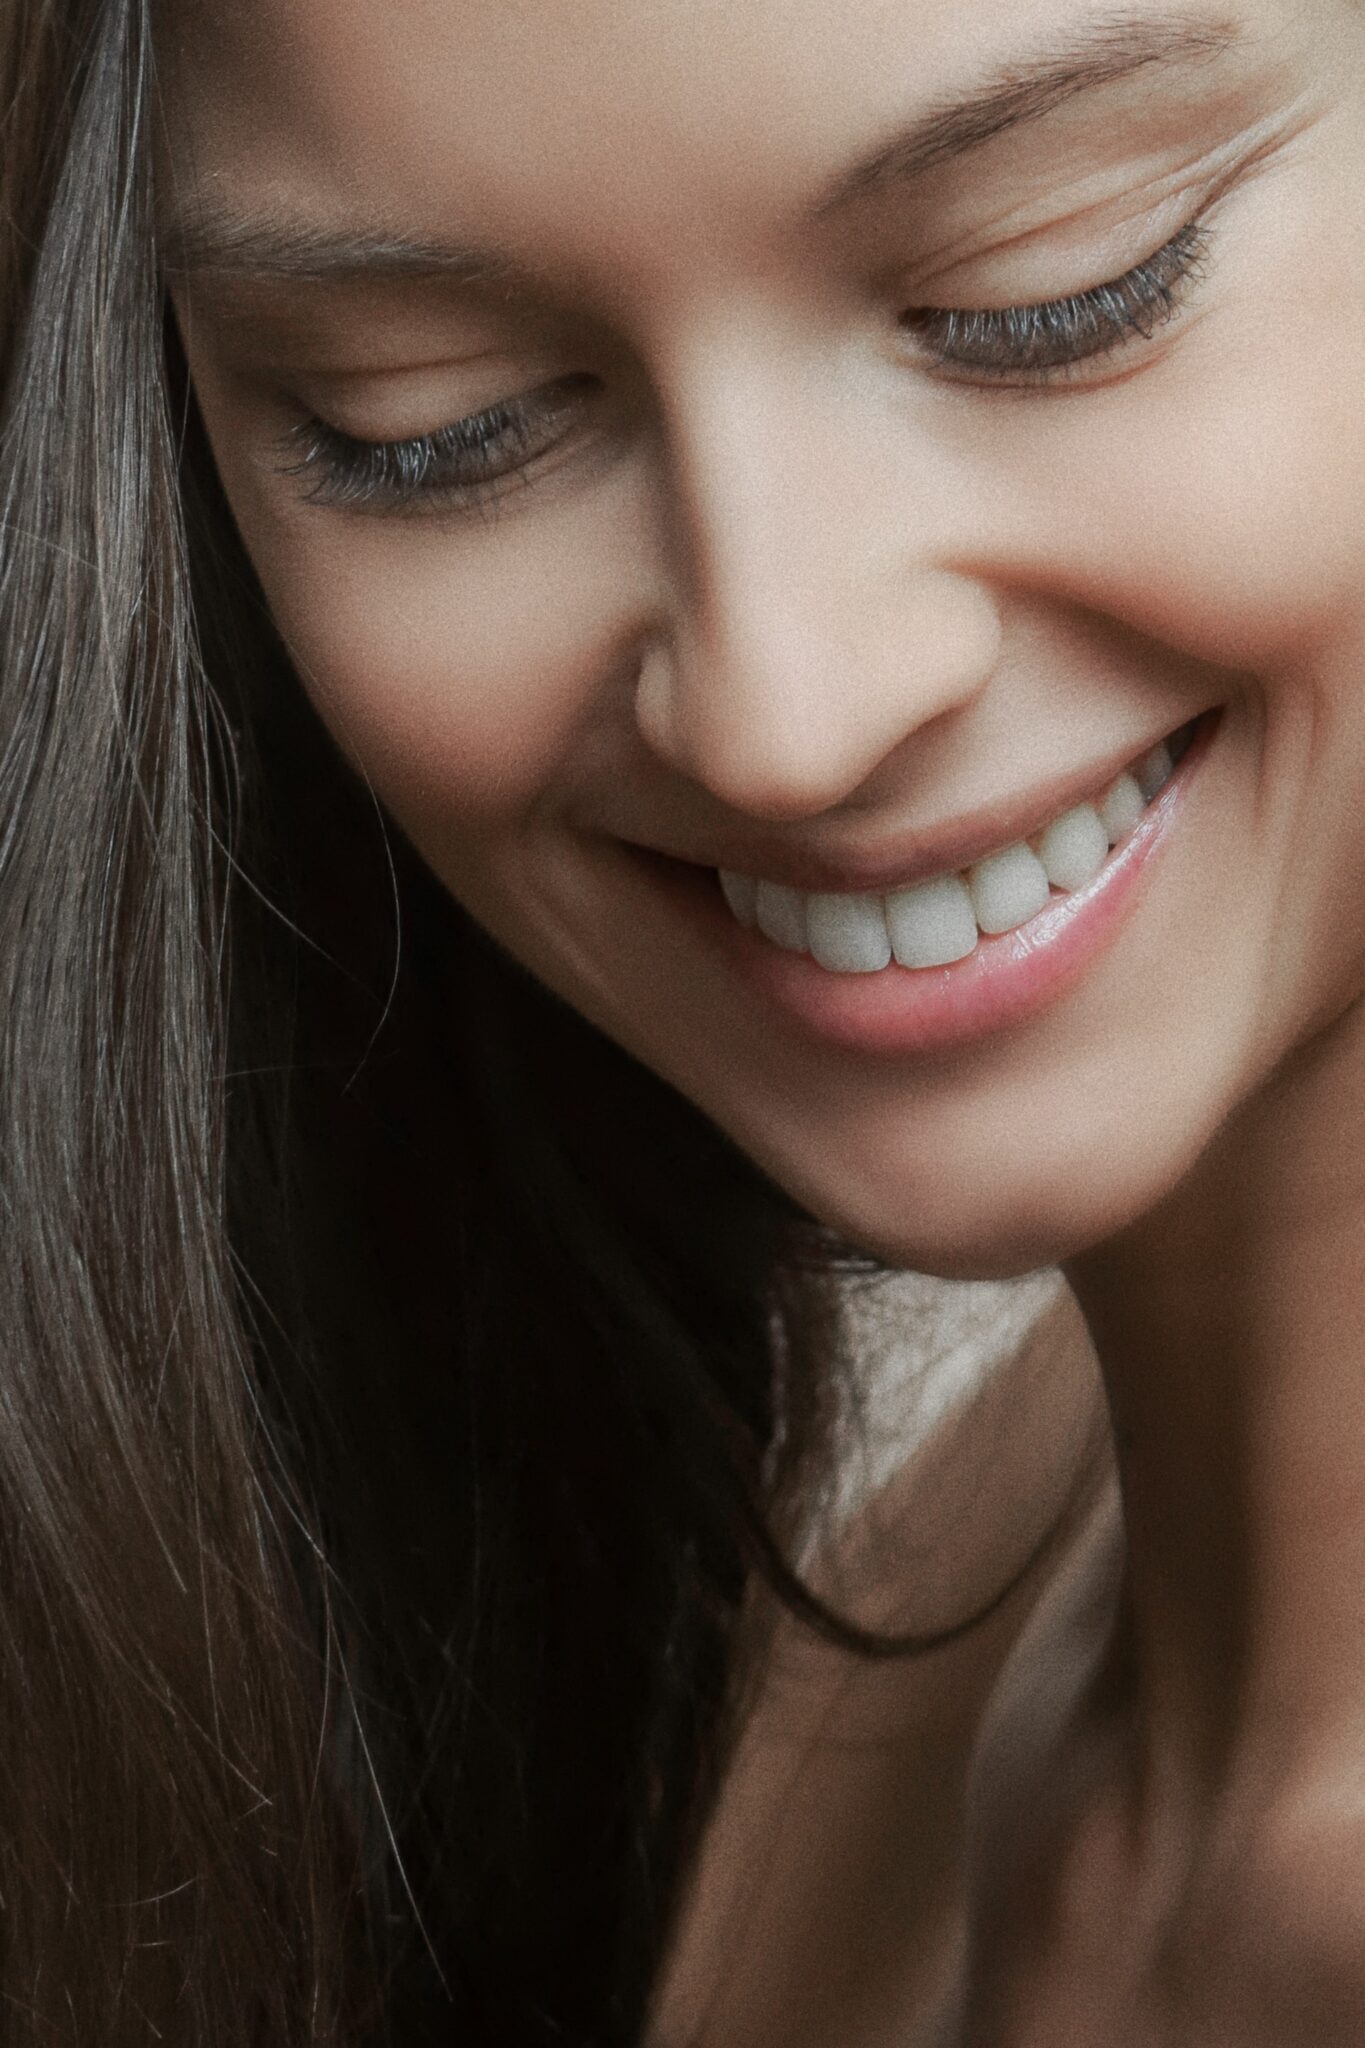 A close-up of a smiling woman with closed eyes at the dentist.